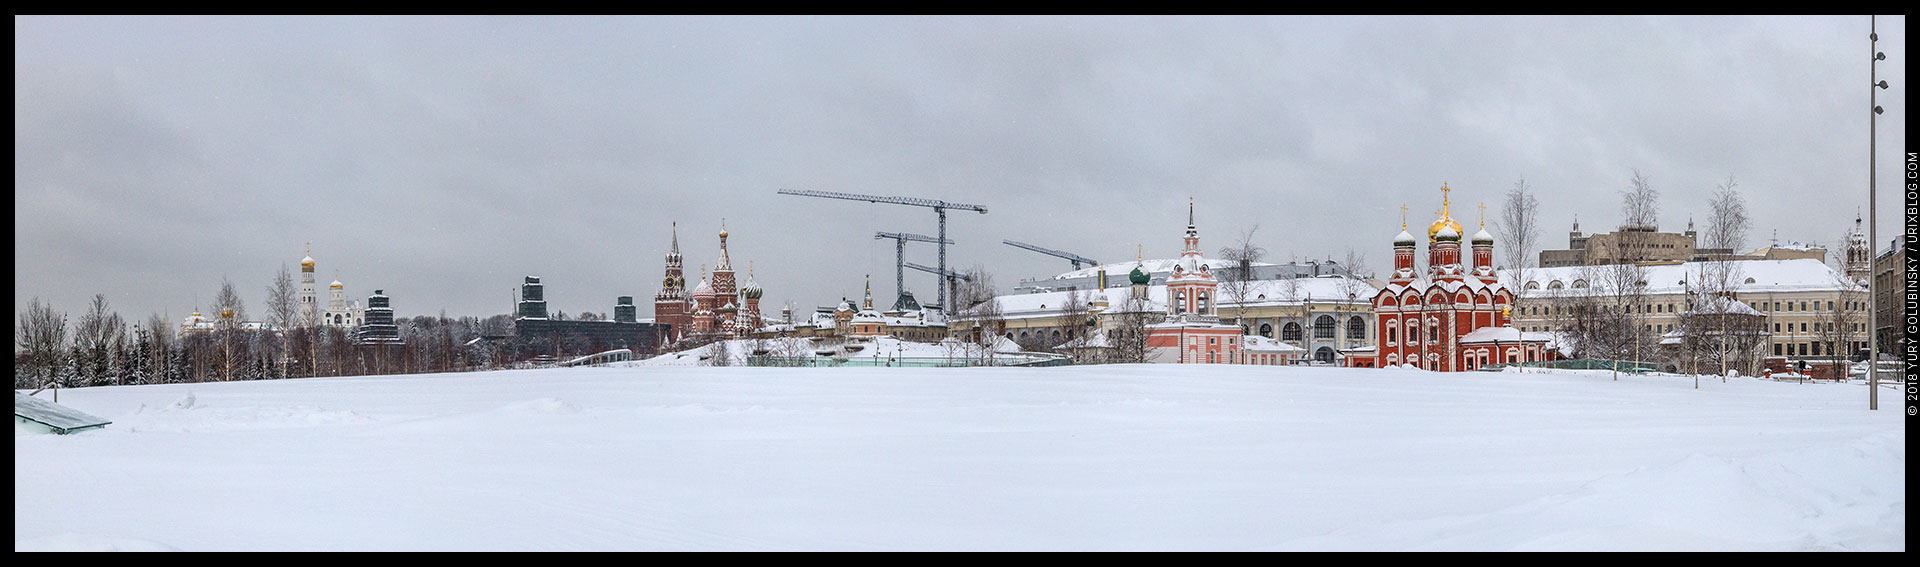 Zaryadye park, Moscow, Russia, 2018, winter, snow, morning, deserted, panorama